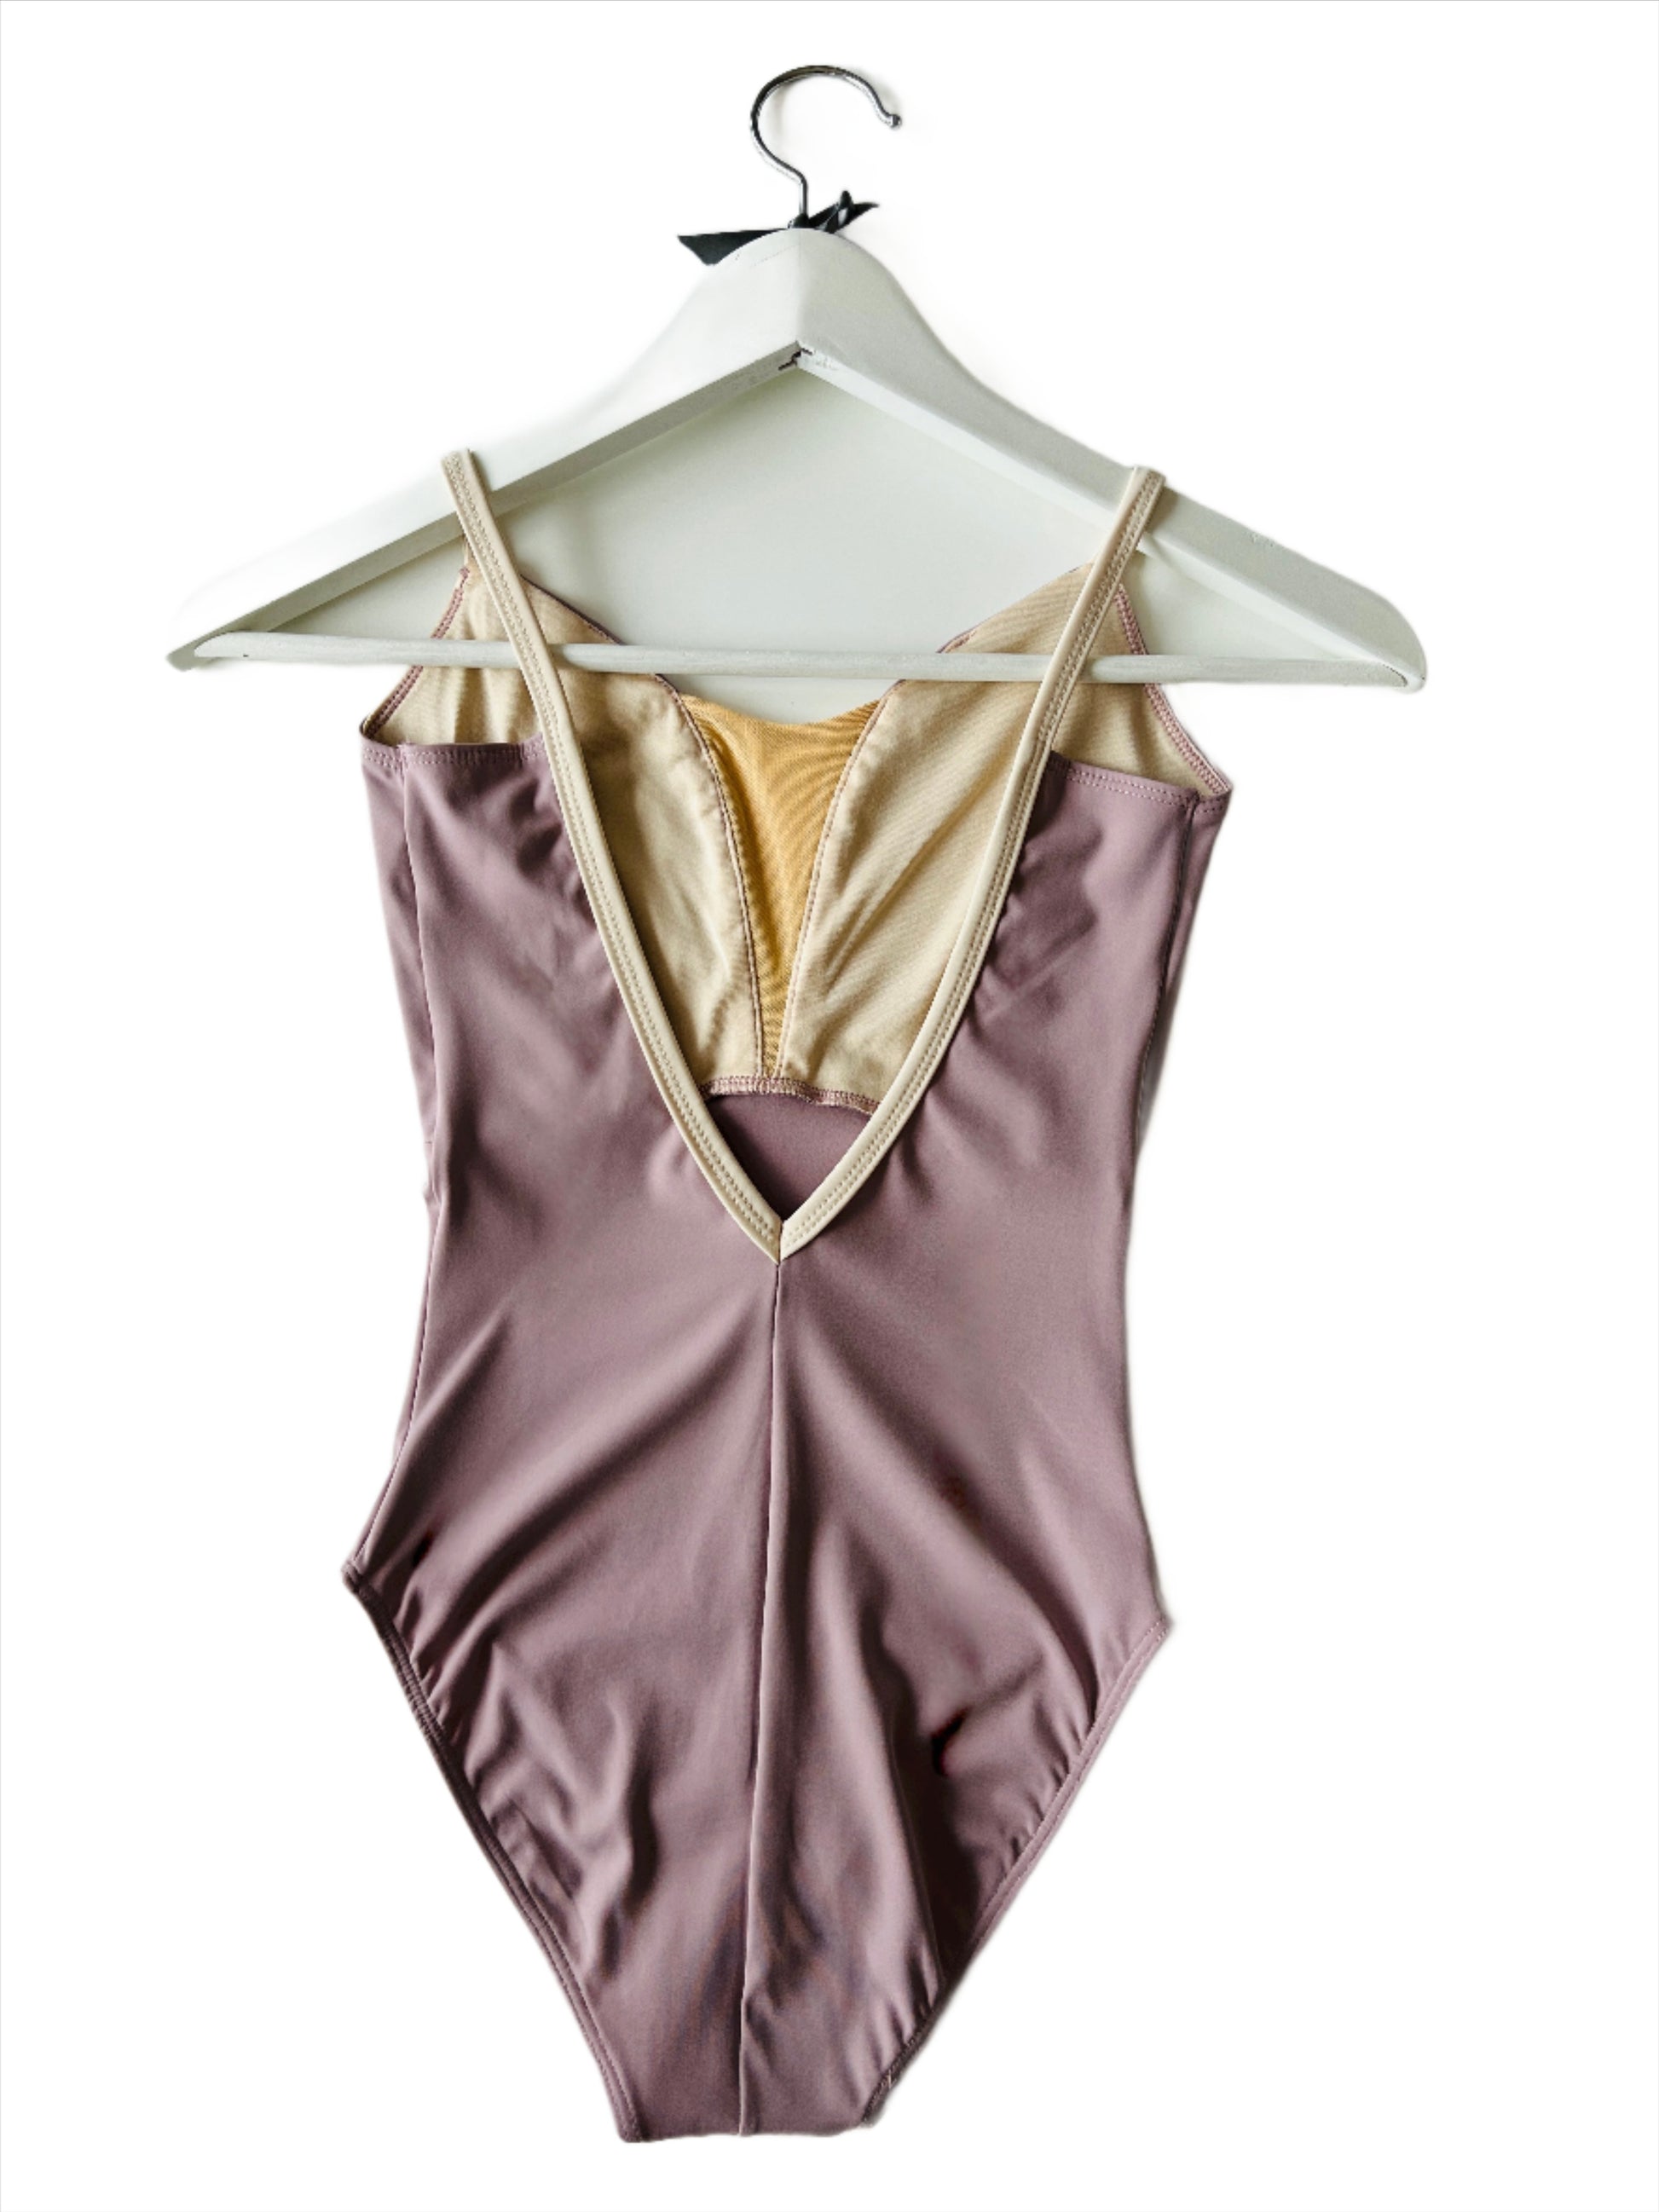 V mesh camisole ballet leotard in lavender pink from The Collective Dancewear